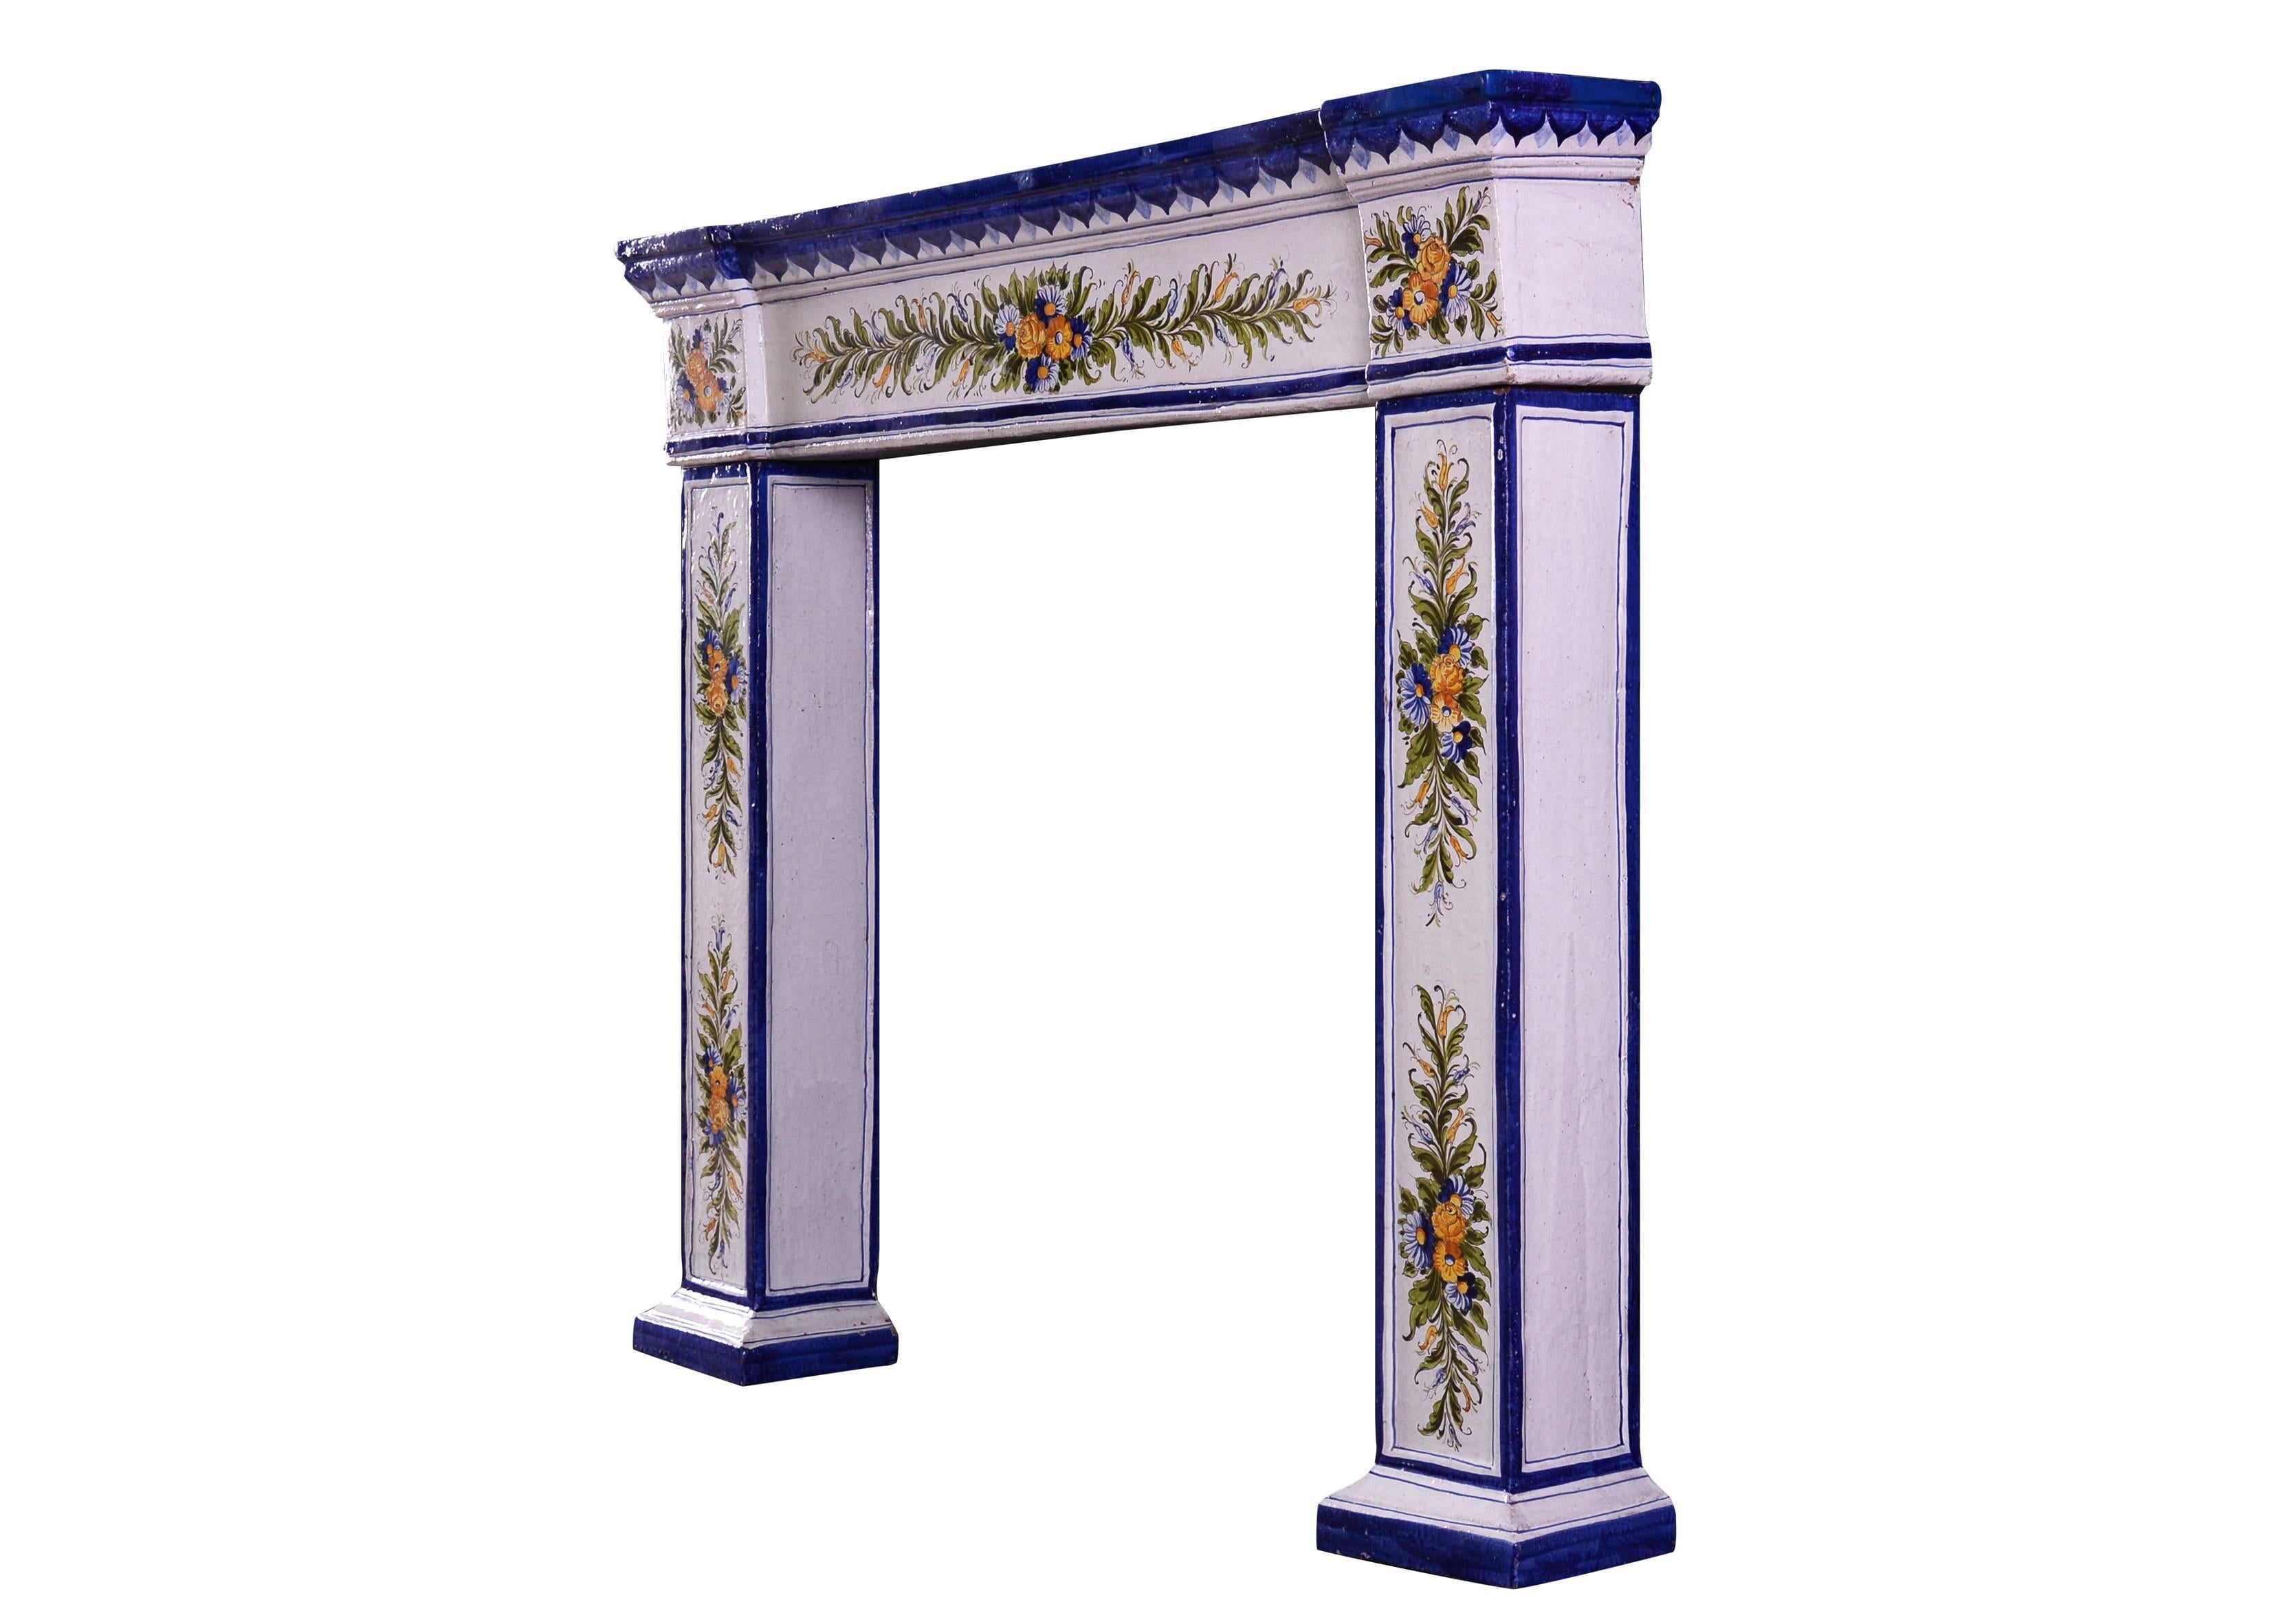 19th Century Painted Ceramic Fireplace of Small-Scale